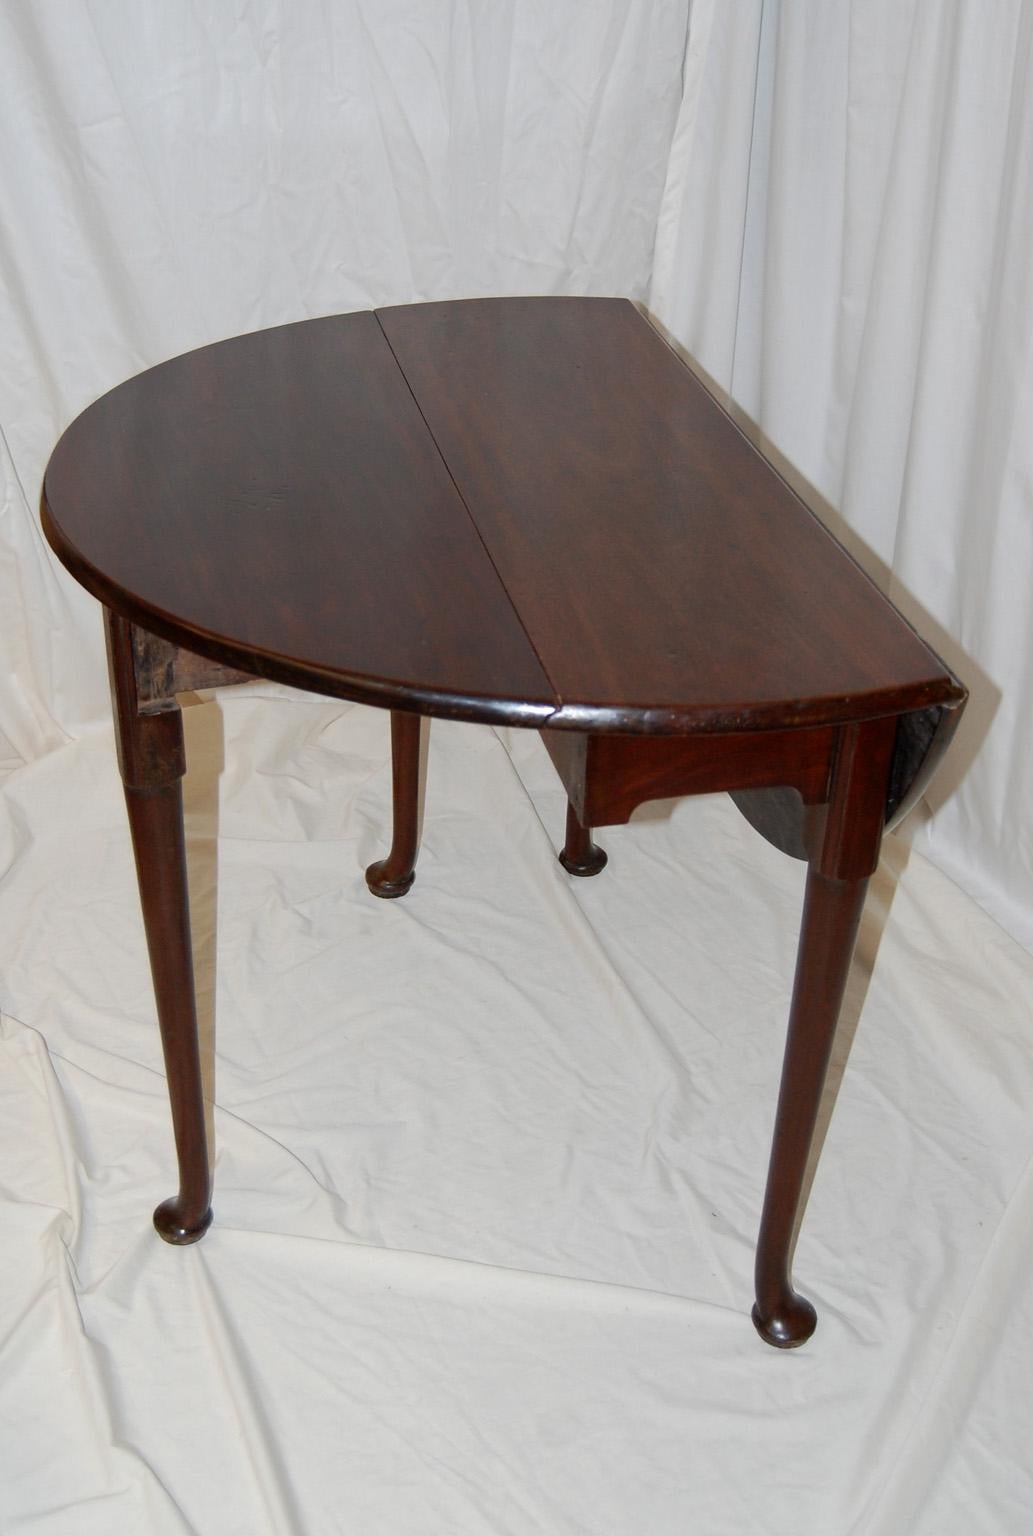 18th Century English George II Mahogany Dropleaf Pad Foot Thirty Six Inch Oval Table For Sale